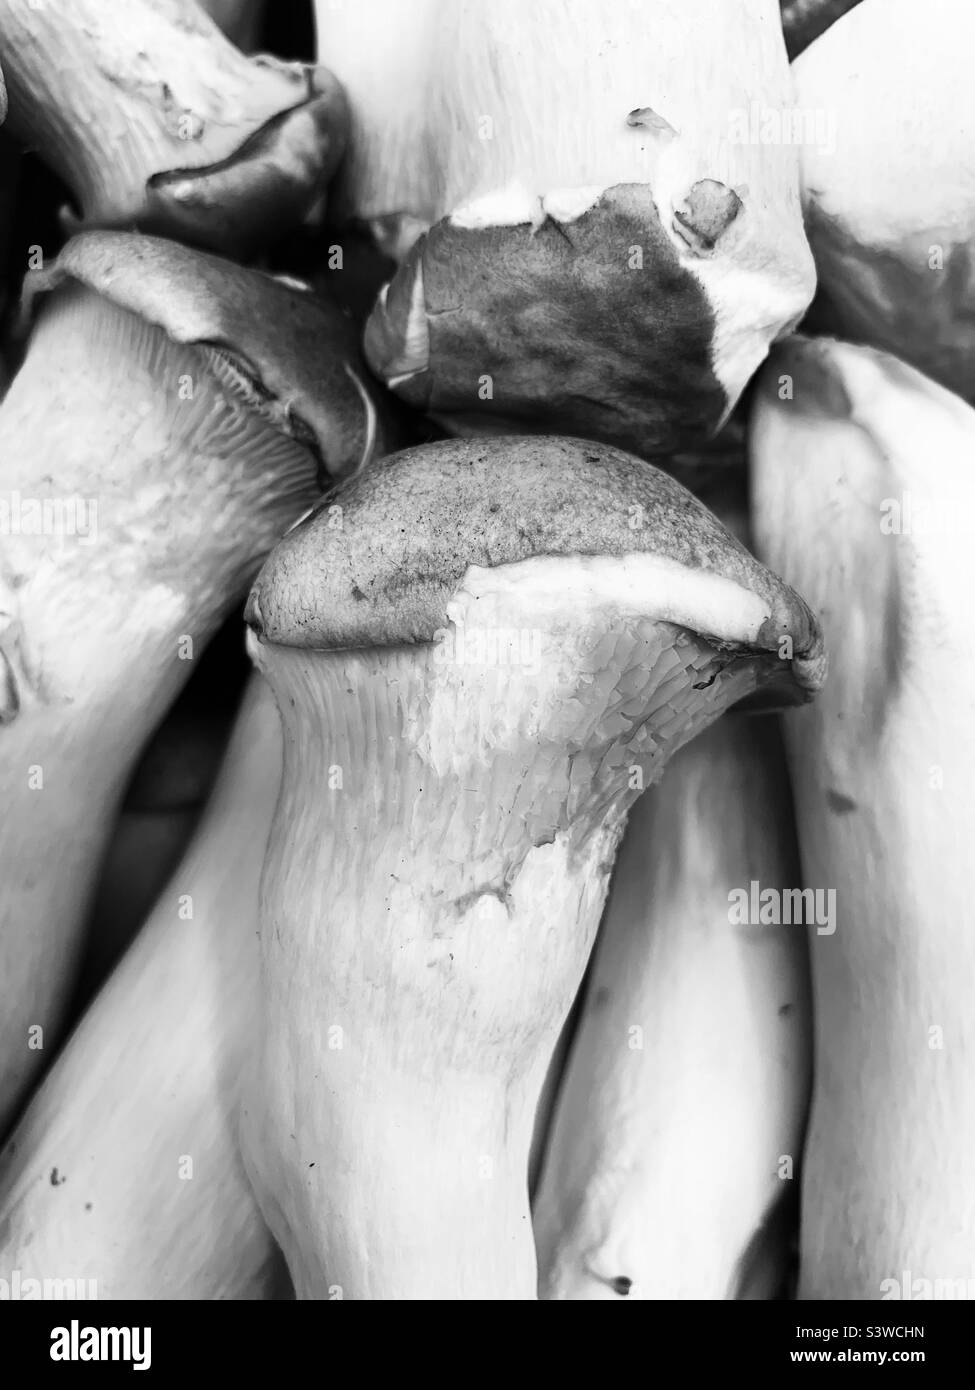 Delicious fresh king oyster mushrooms in black and white. Stock Photo